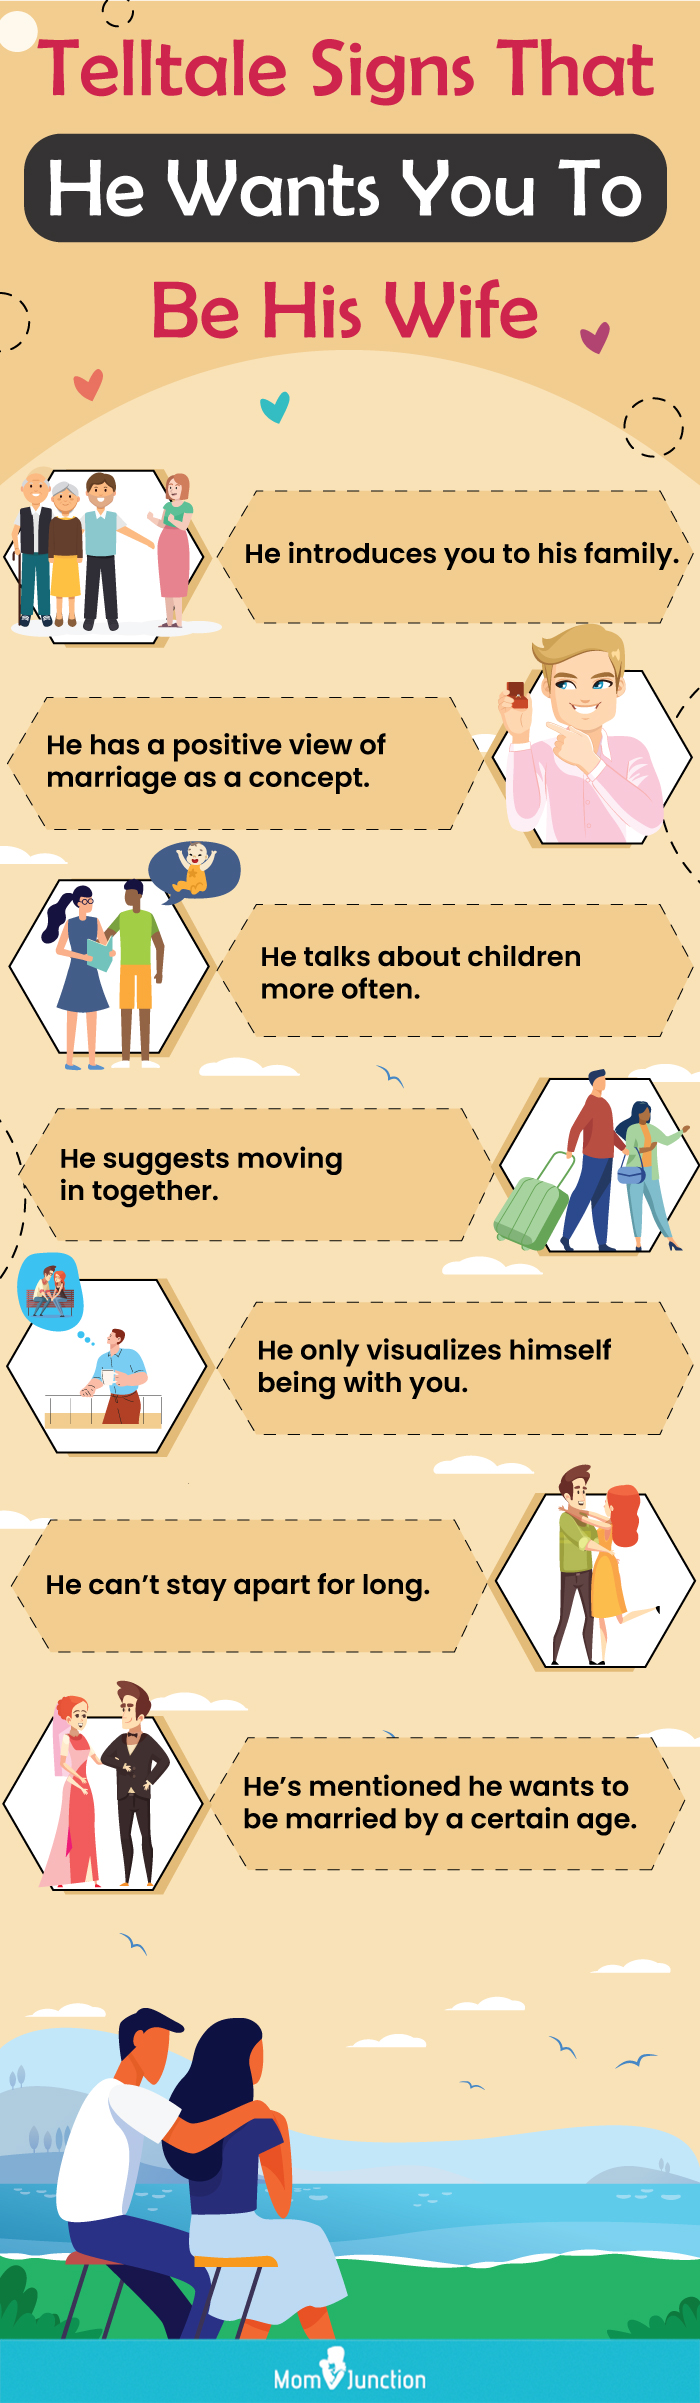 relationship loyalty quotes [infographic]signs he wants to marry you [infographic]